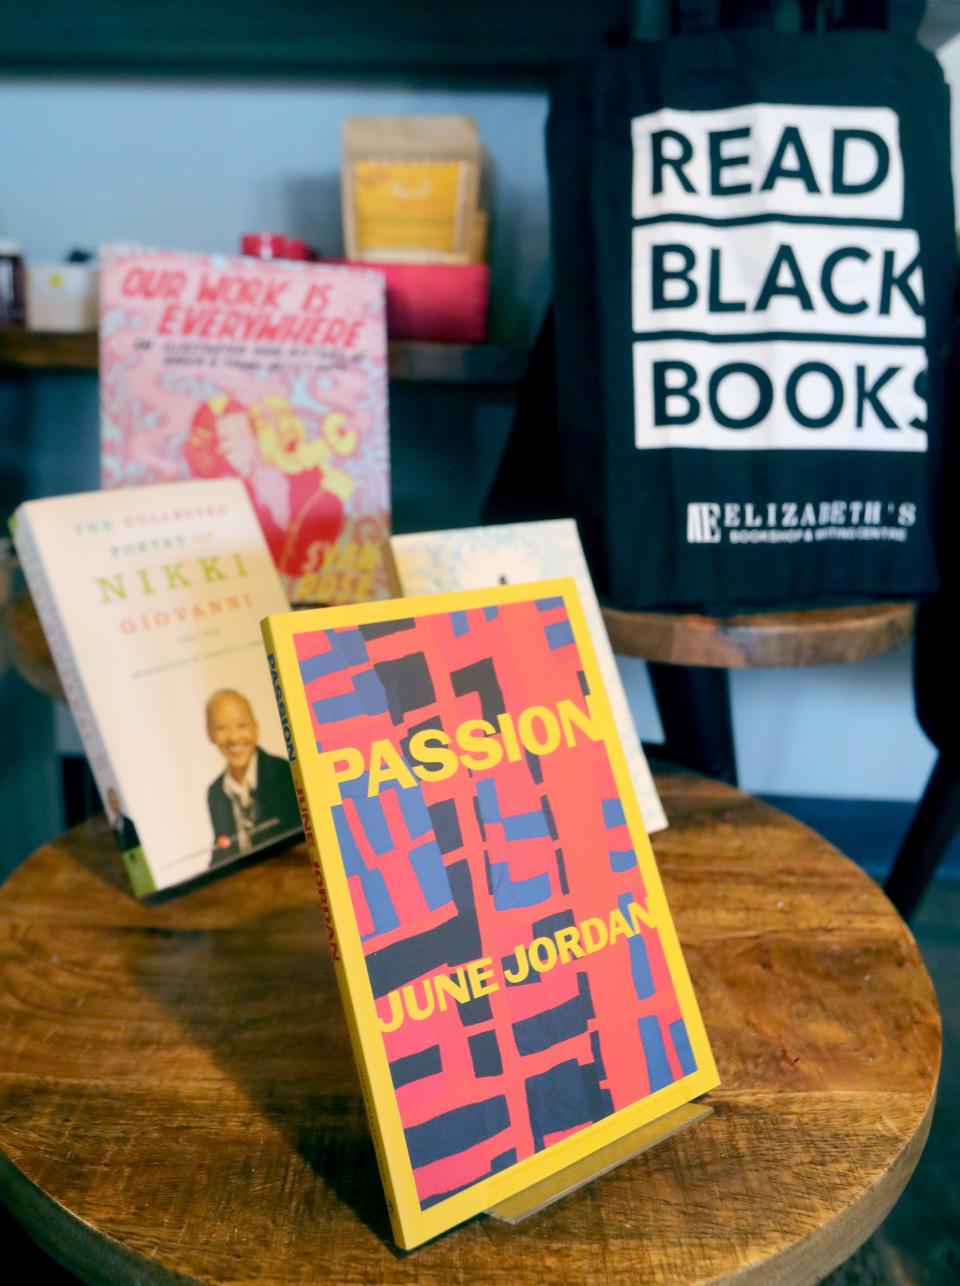 Books by Black authors are on display at Elizabeth's Bookshop & Writing Centre in Akron.